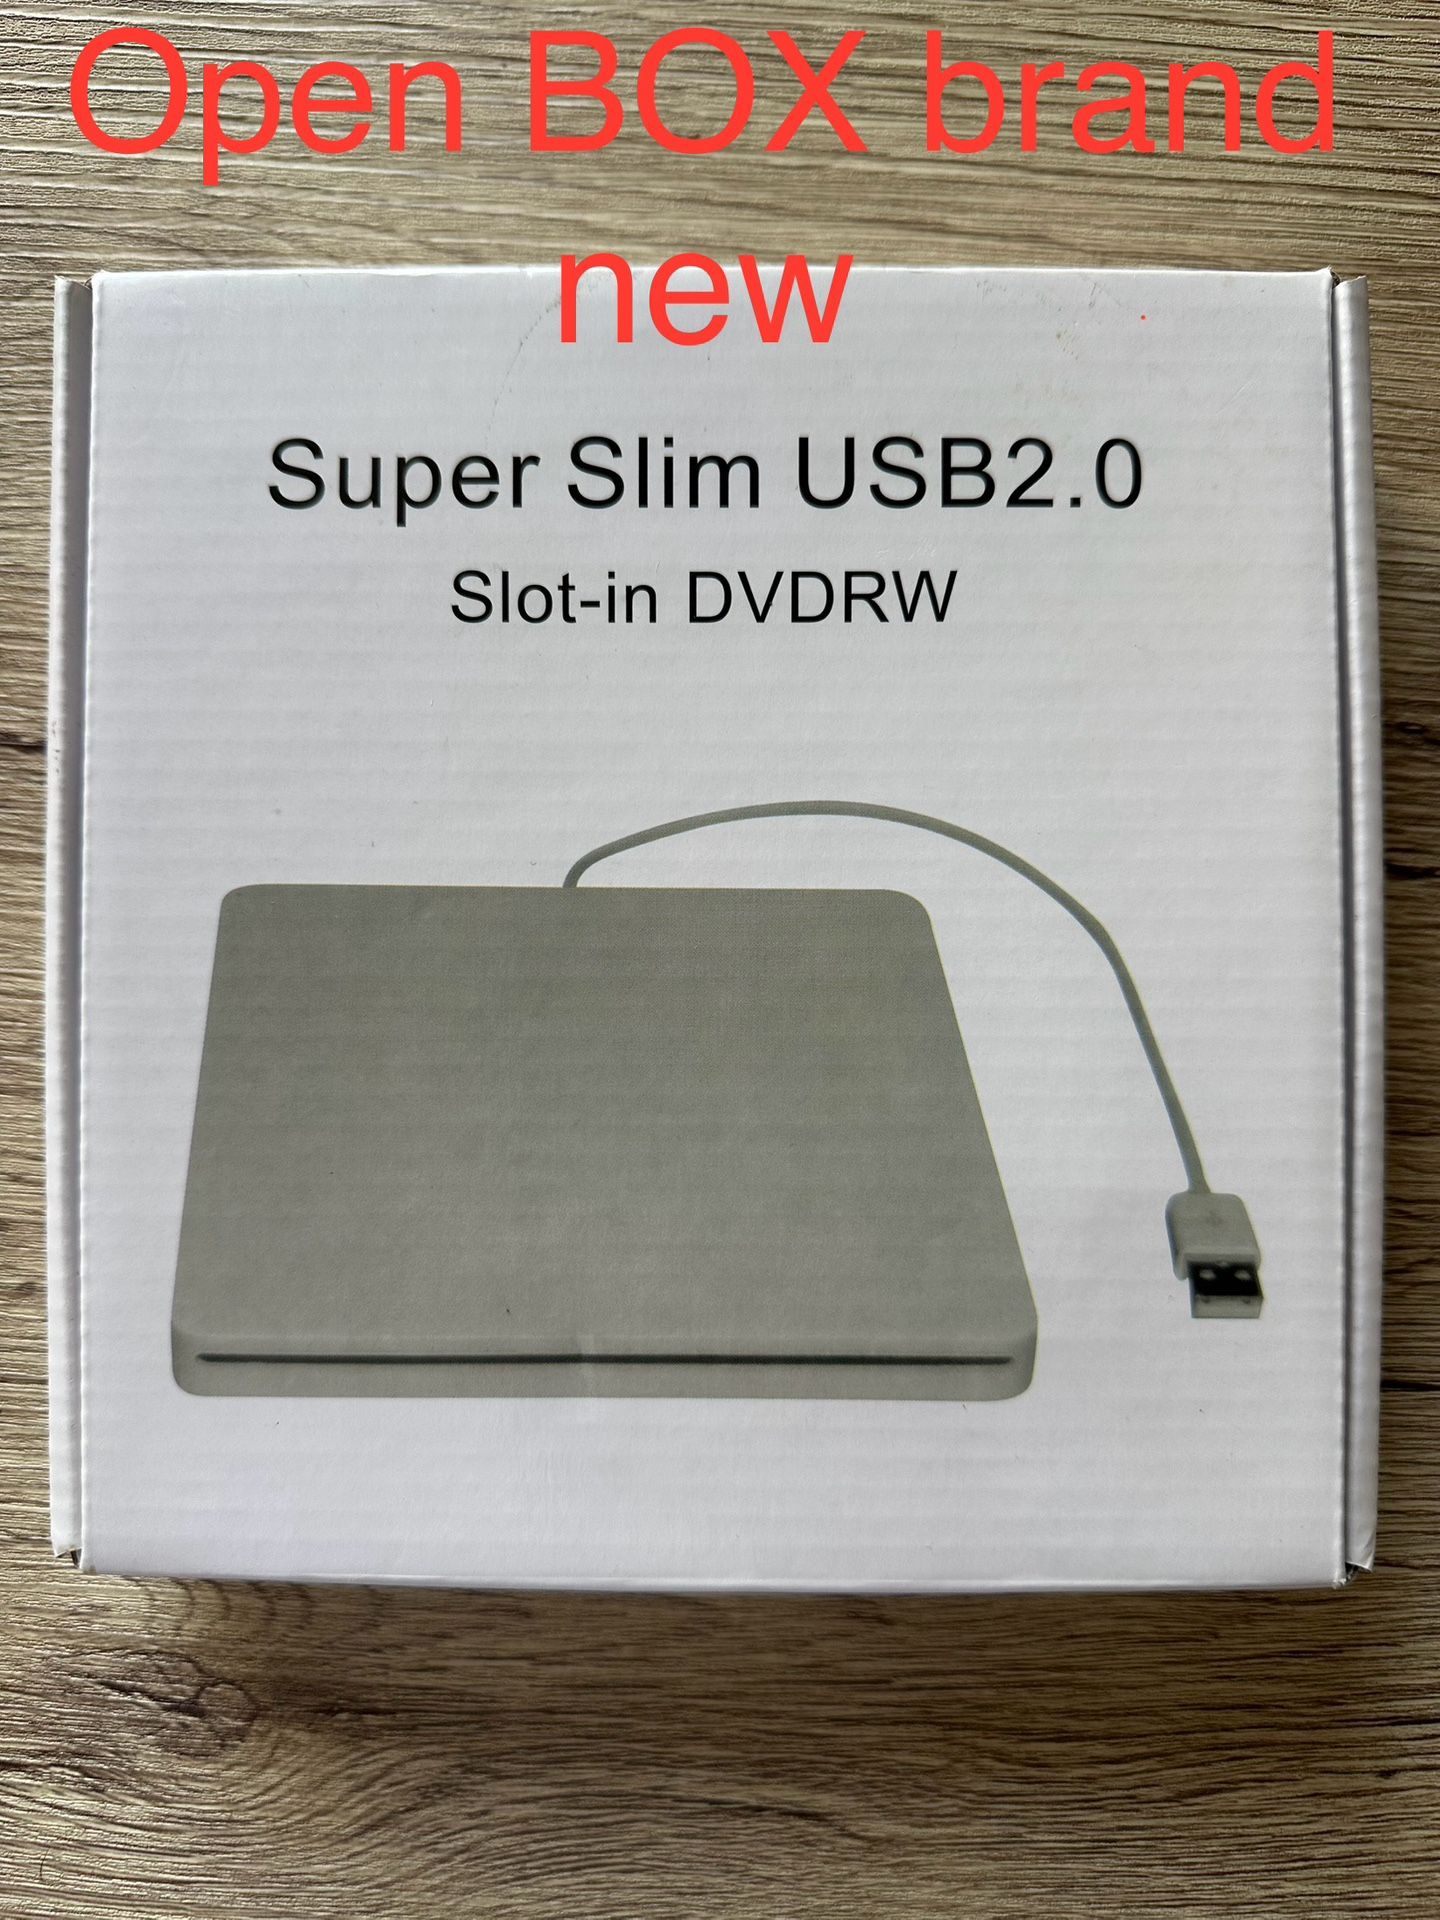 Super Slim USB2.0 Slot-in DVDRW, Opened Box But Never Used 